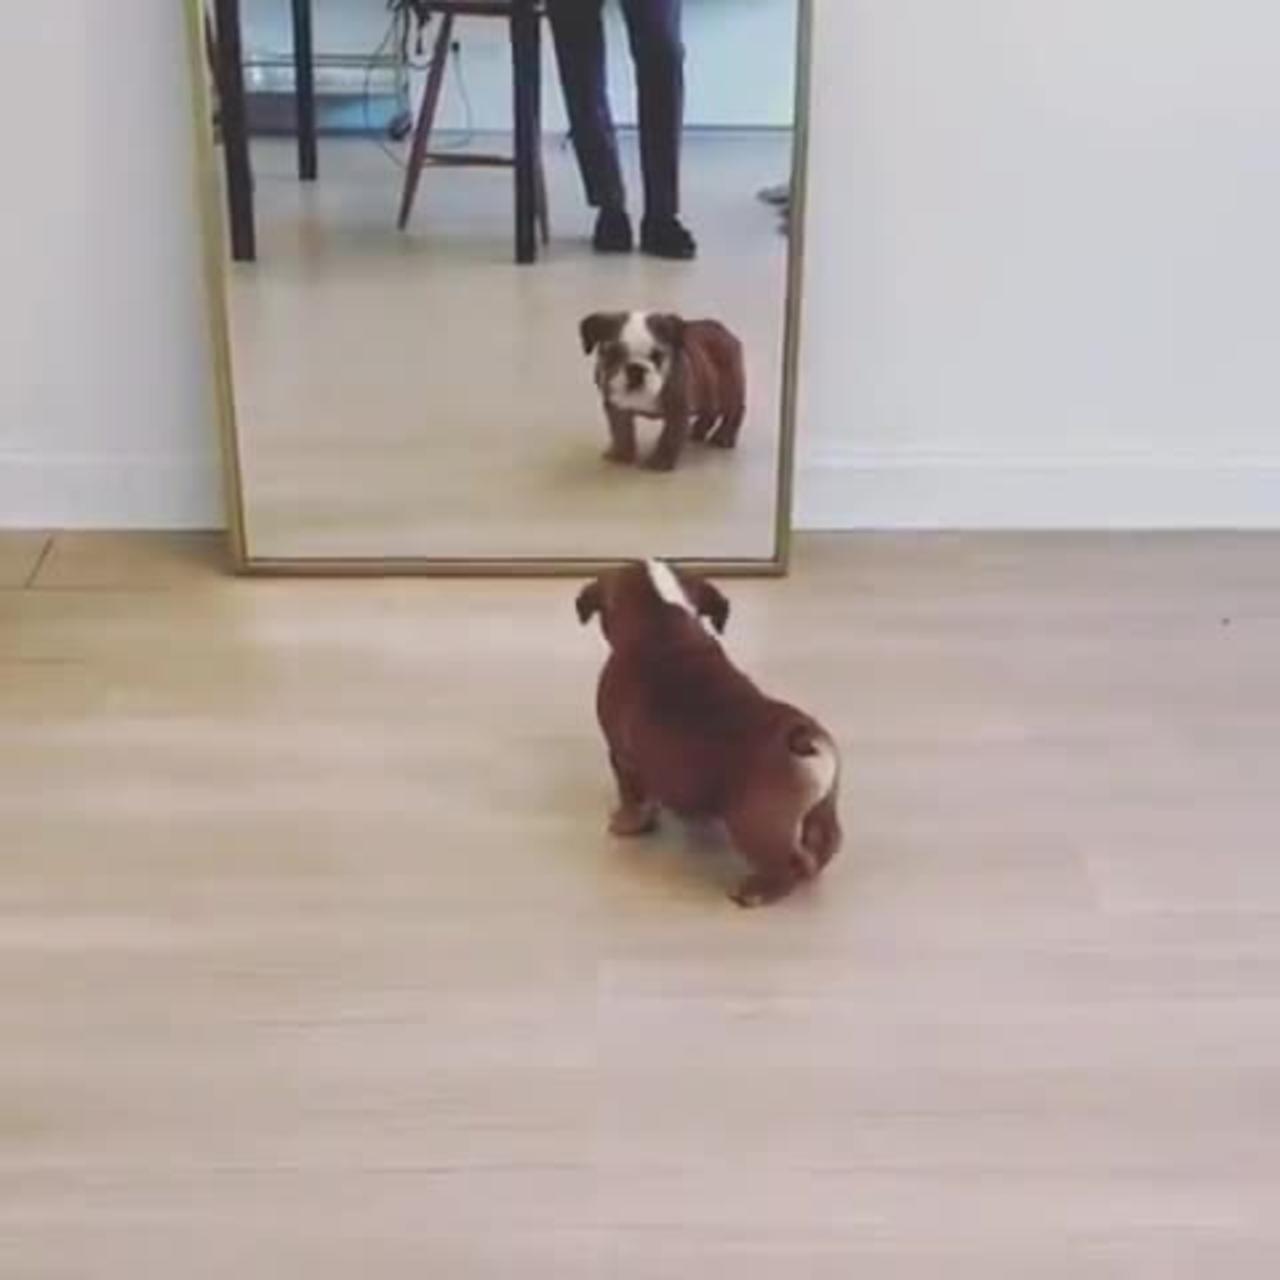 First look in the mirror